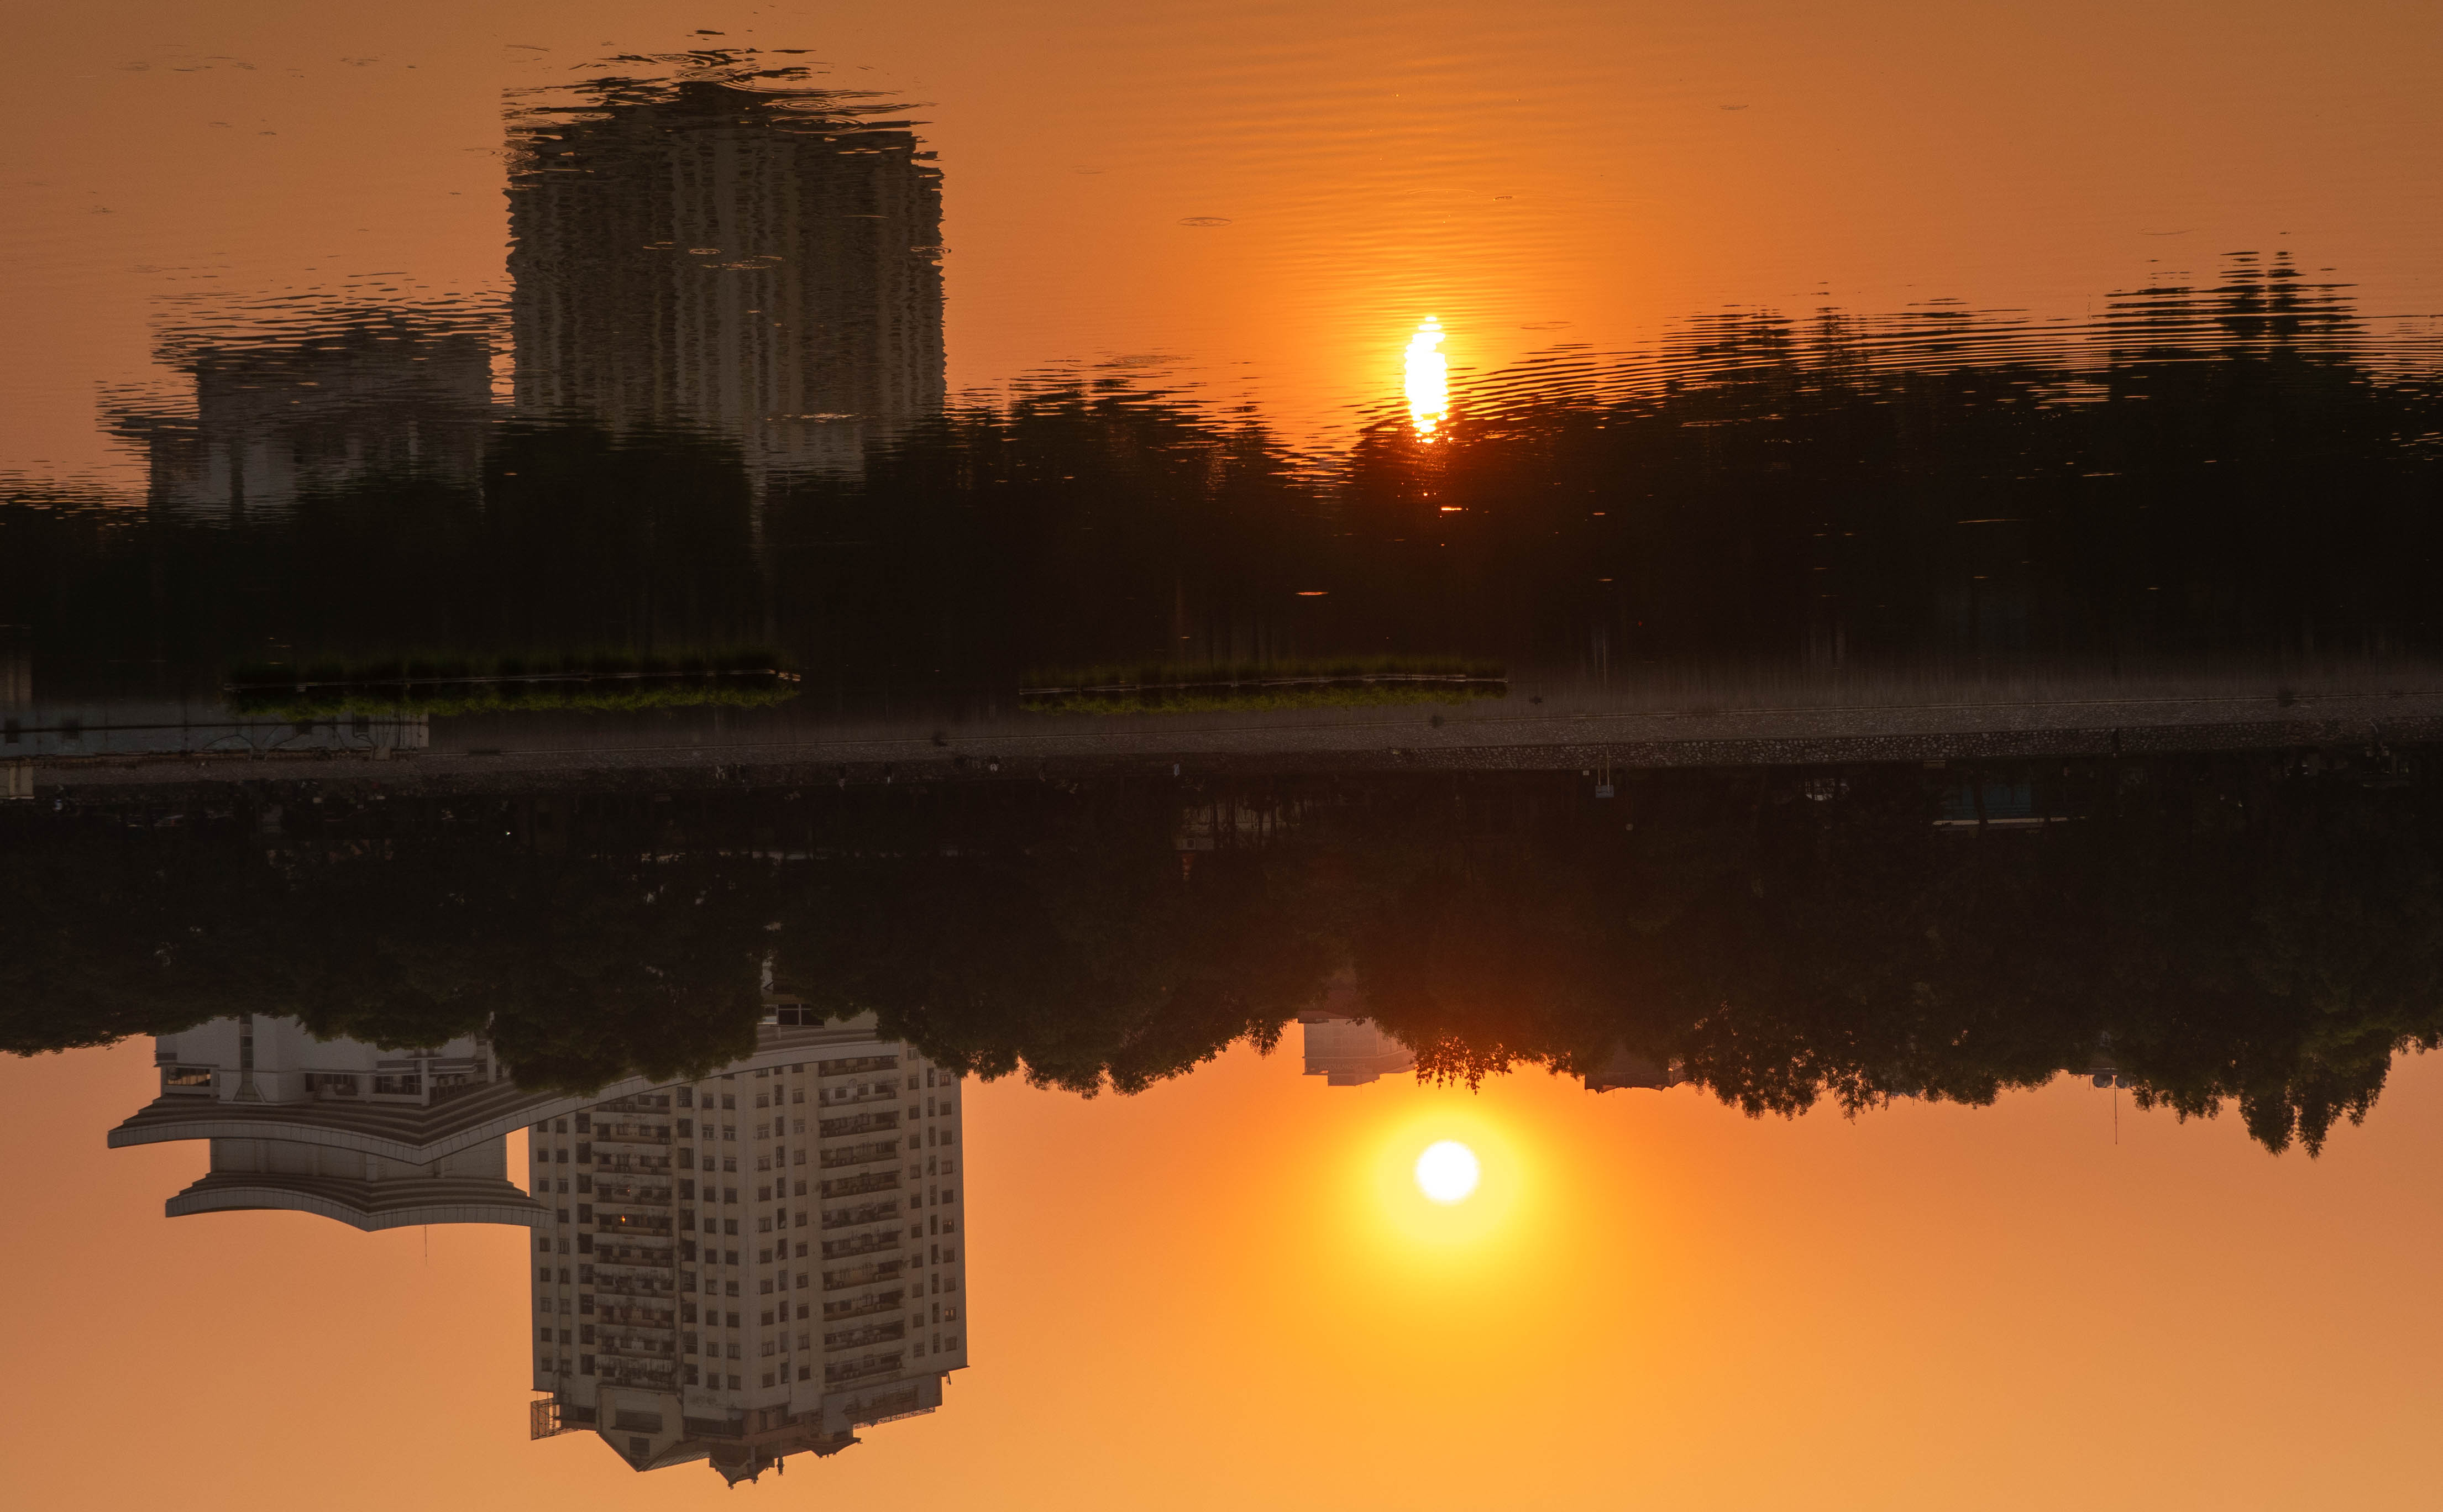 Inverted picture. This is a picture of two buildings by the lake at sunset. The sun is in the sky and the reflection of the sun looks like it is the fire of a candle